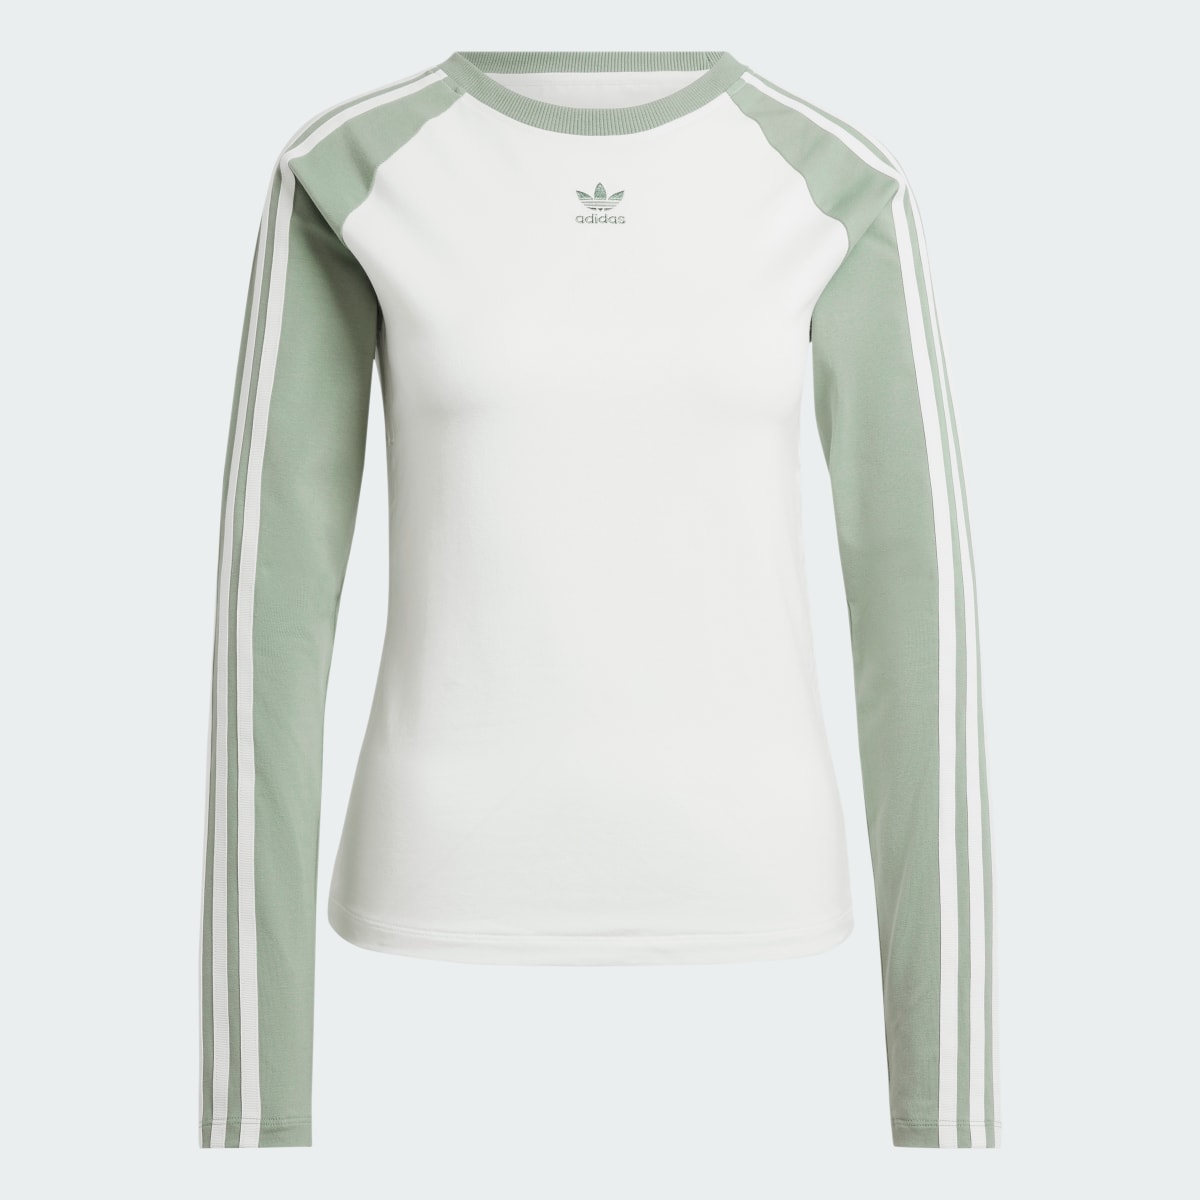 Adidas T-shirt manches longues coupe slim. 5